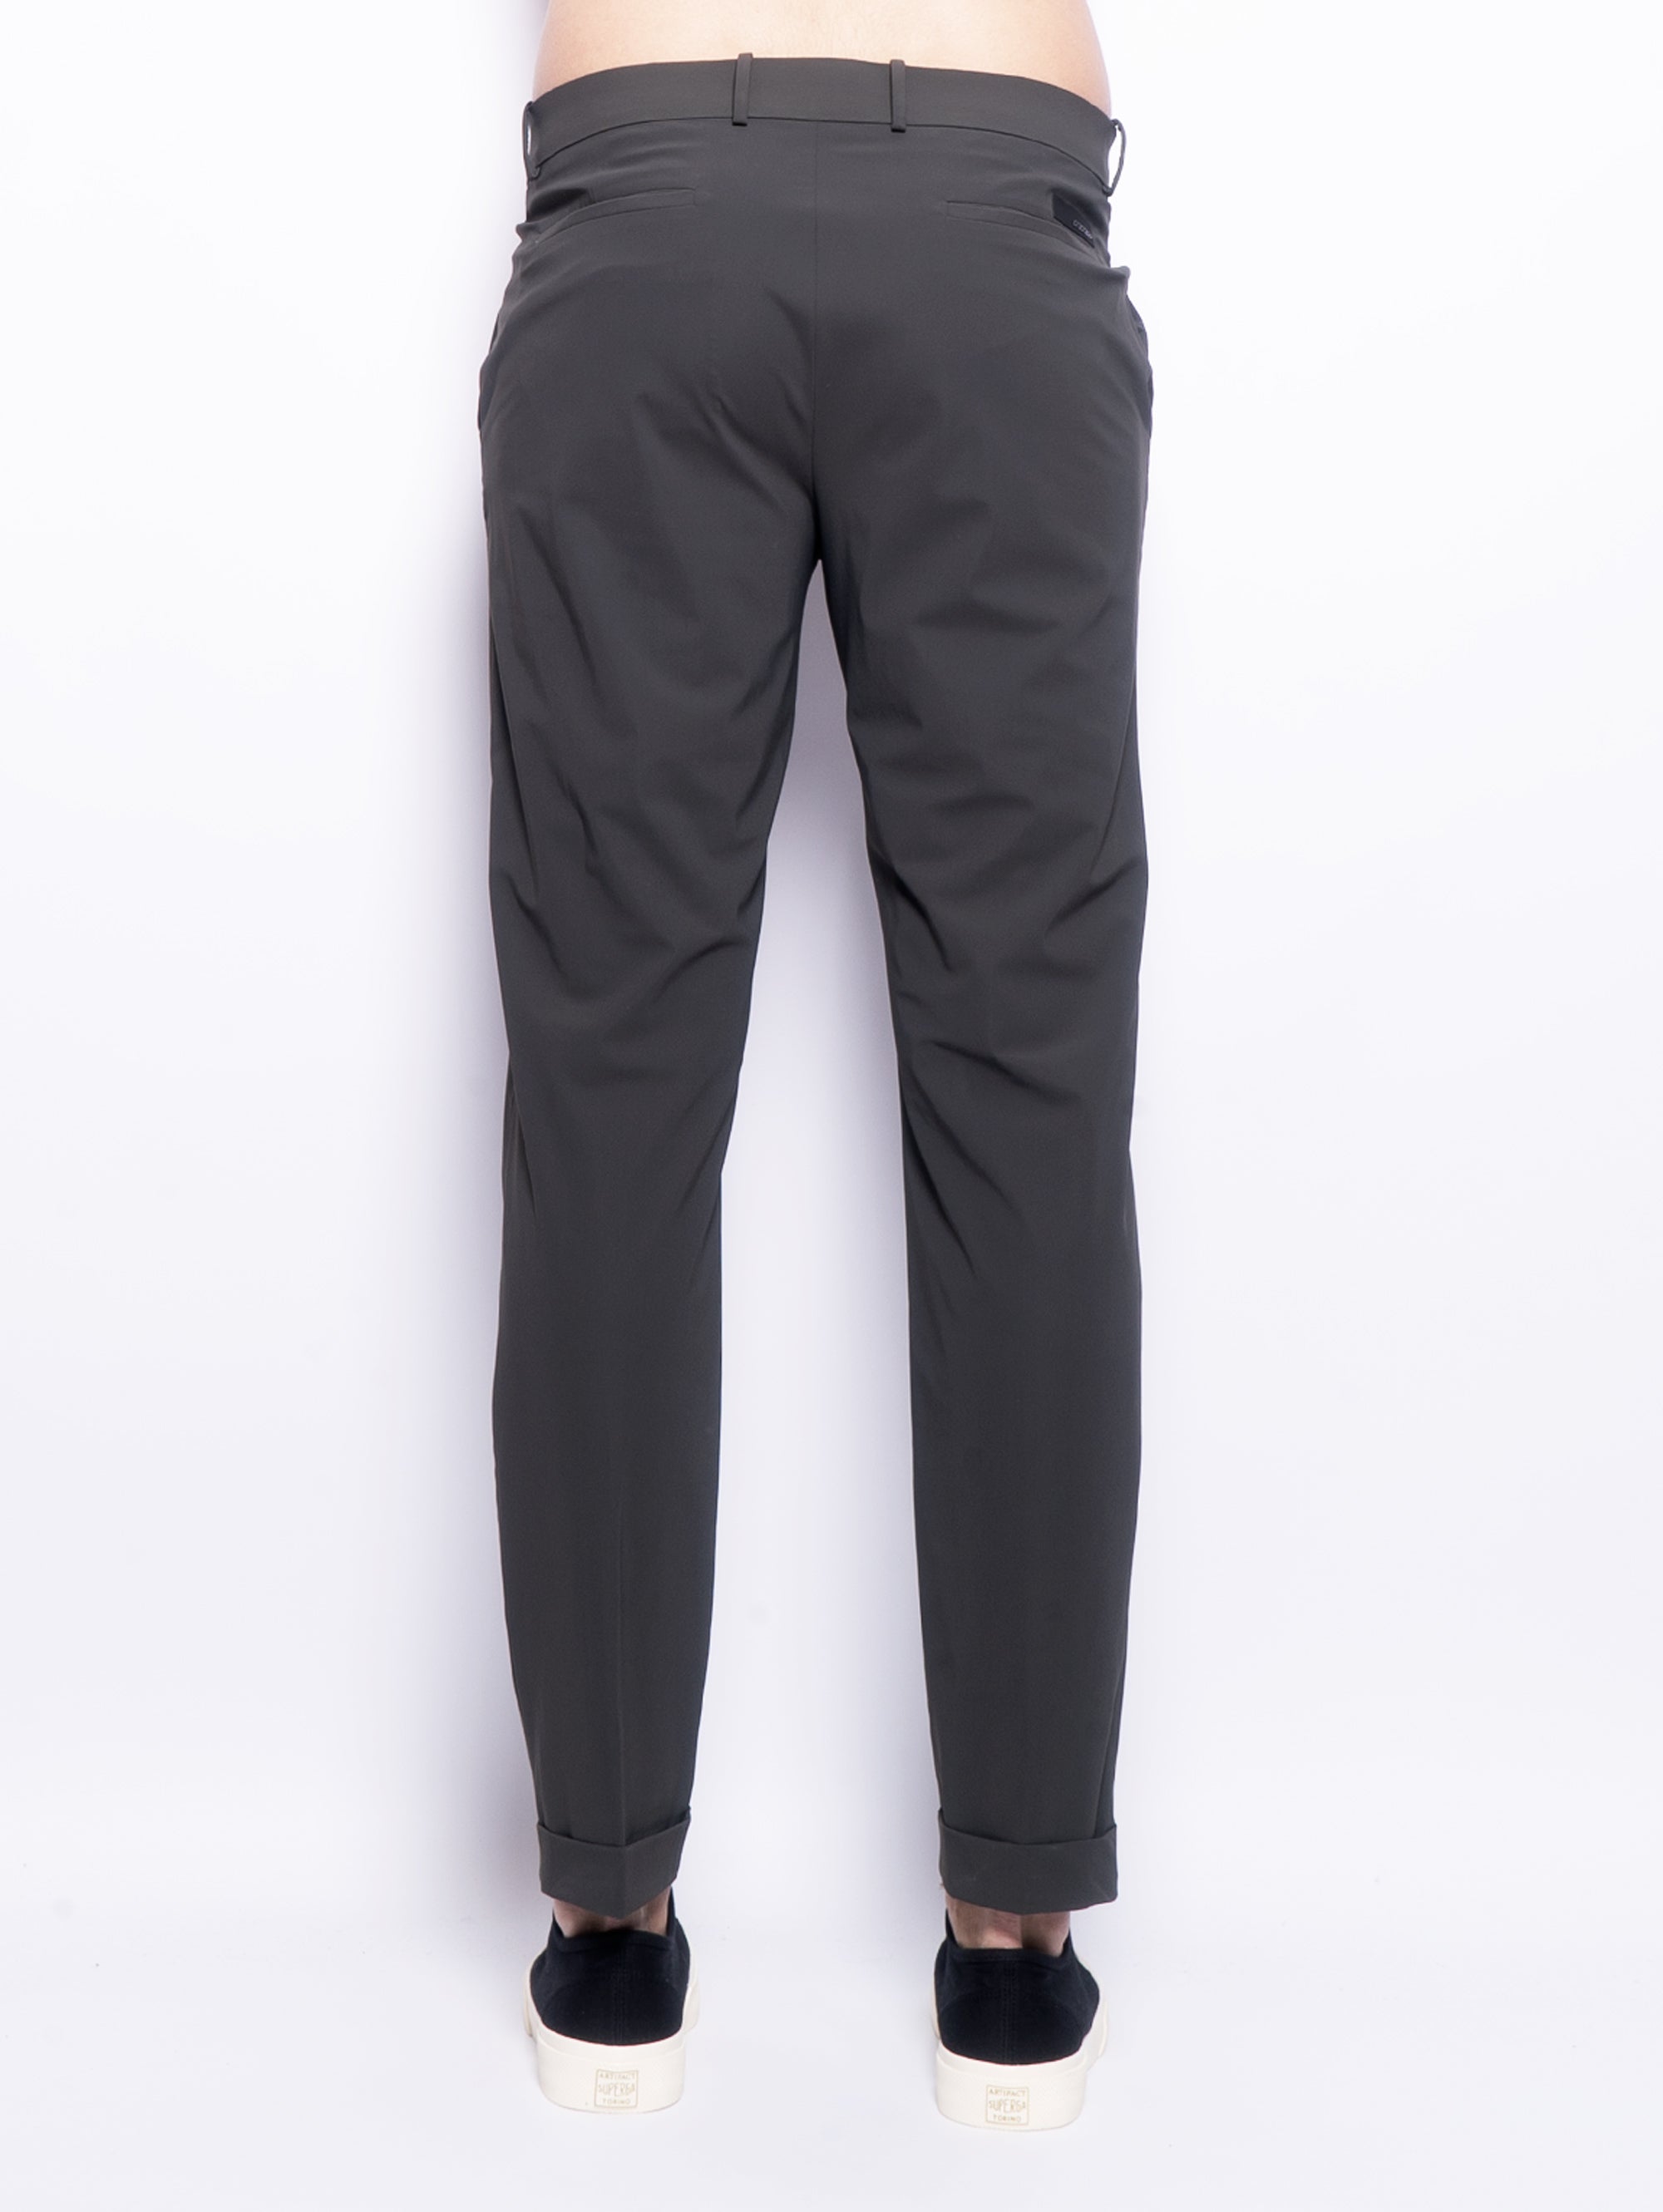 Trousers in Bosco technical fabric